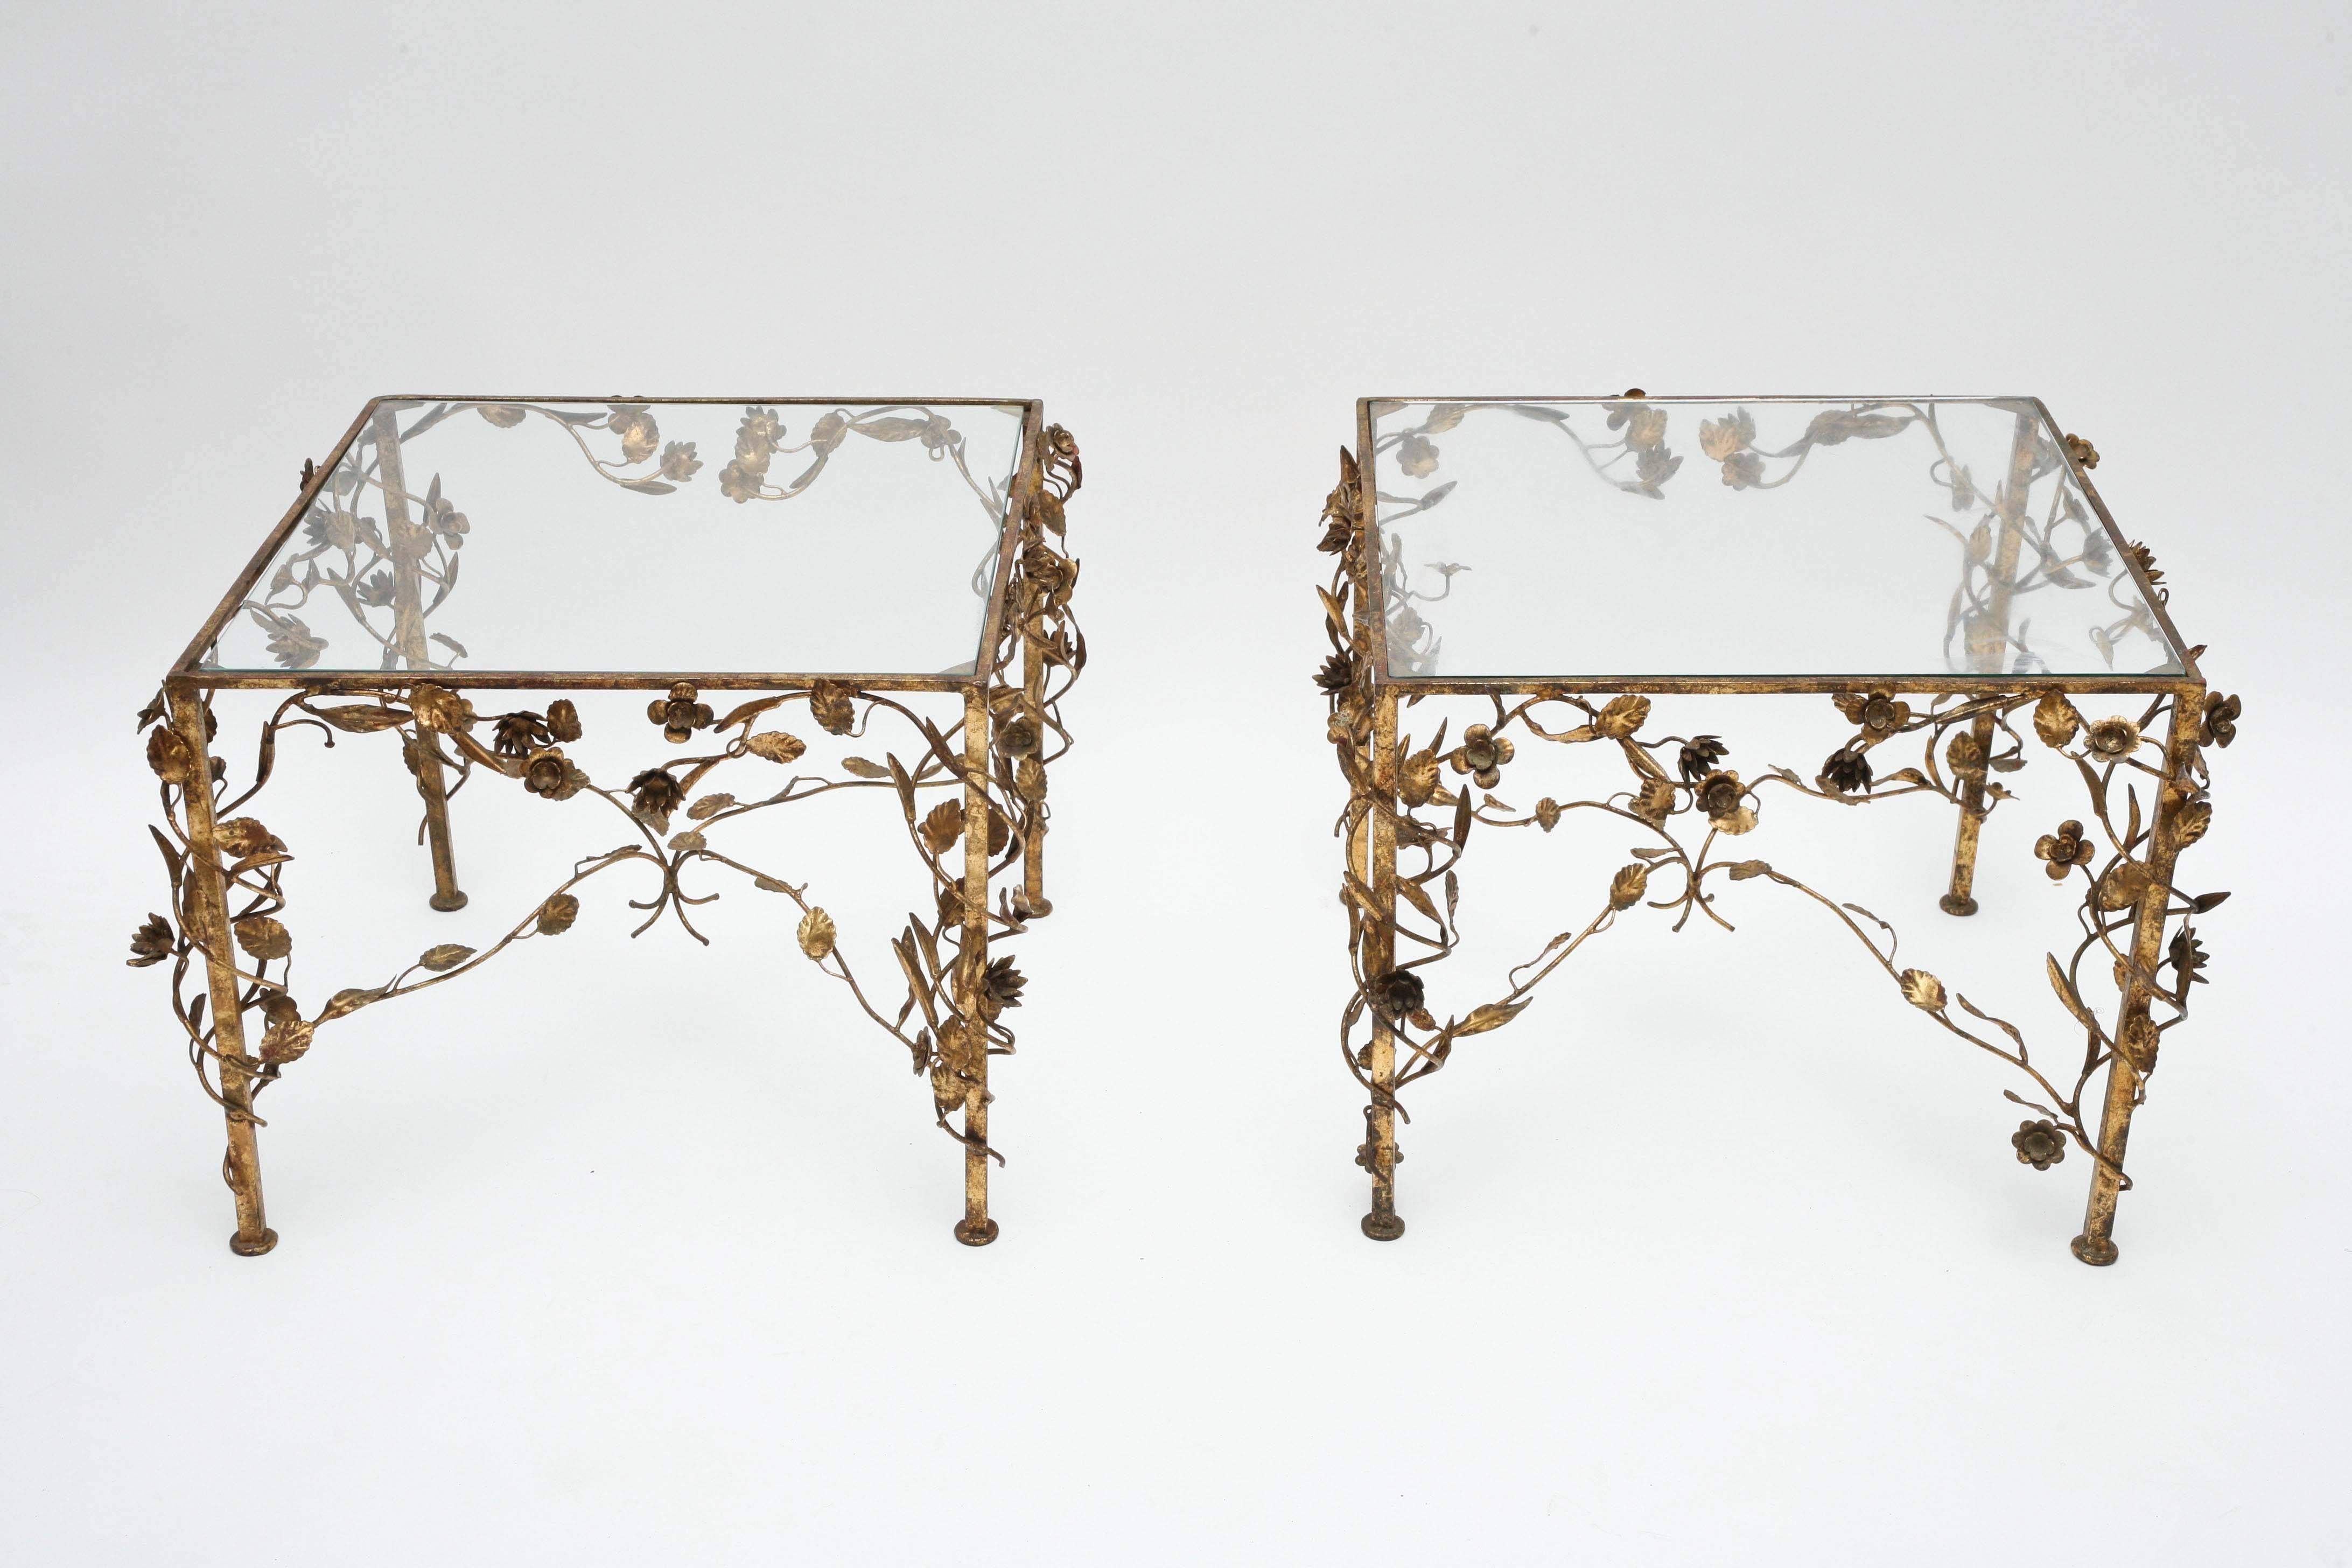 Gorgeous foliage style Hollywood Regency gold and glass side tables, 1950s, USA.